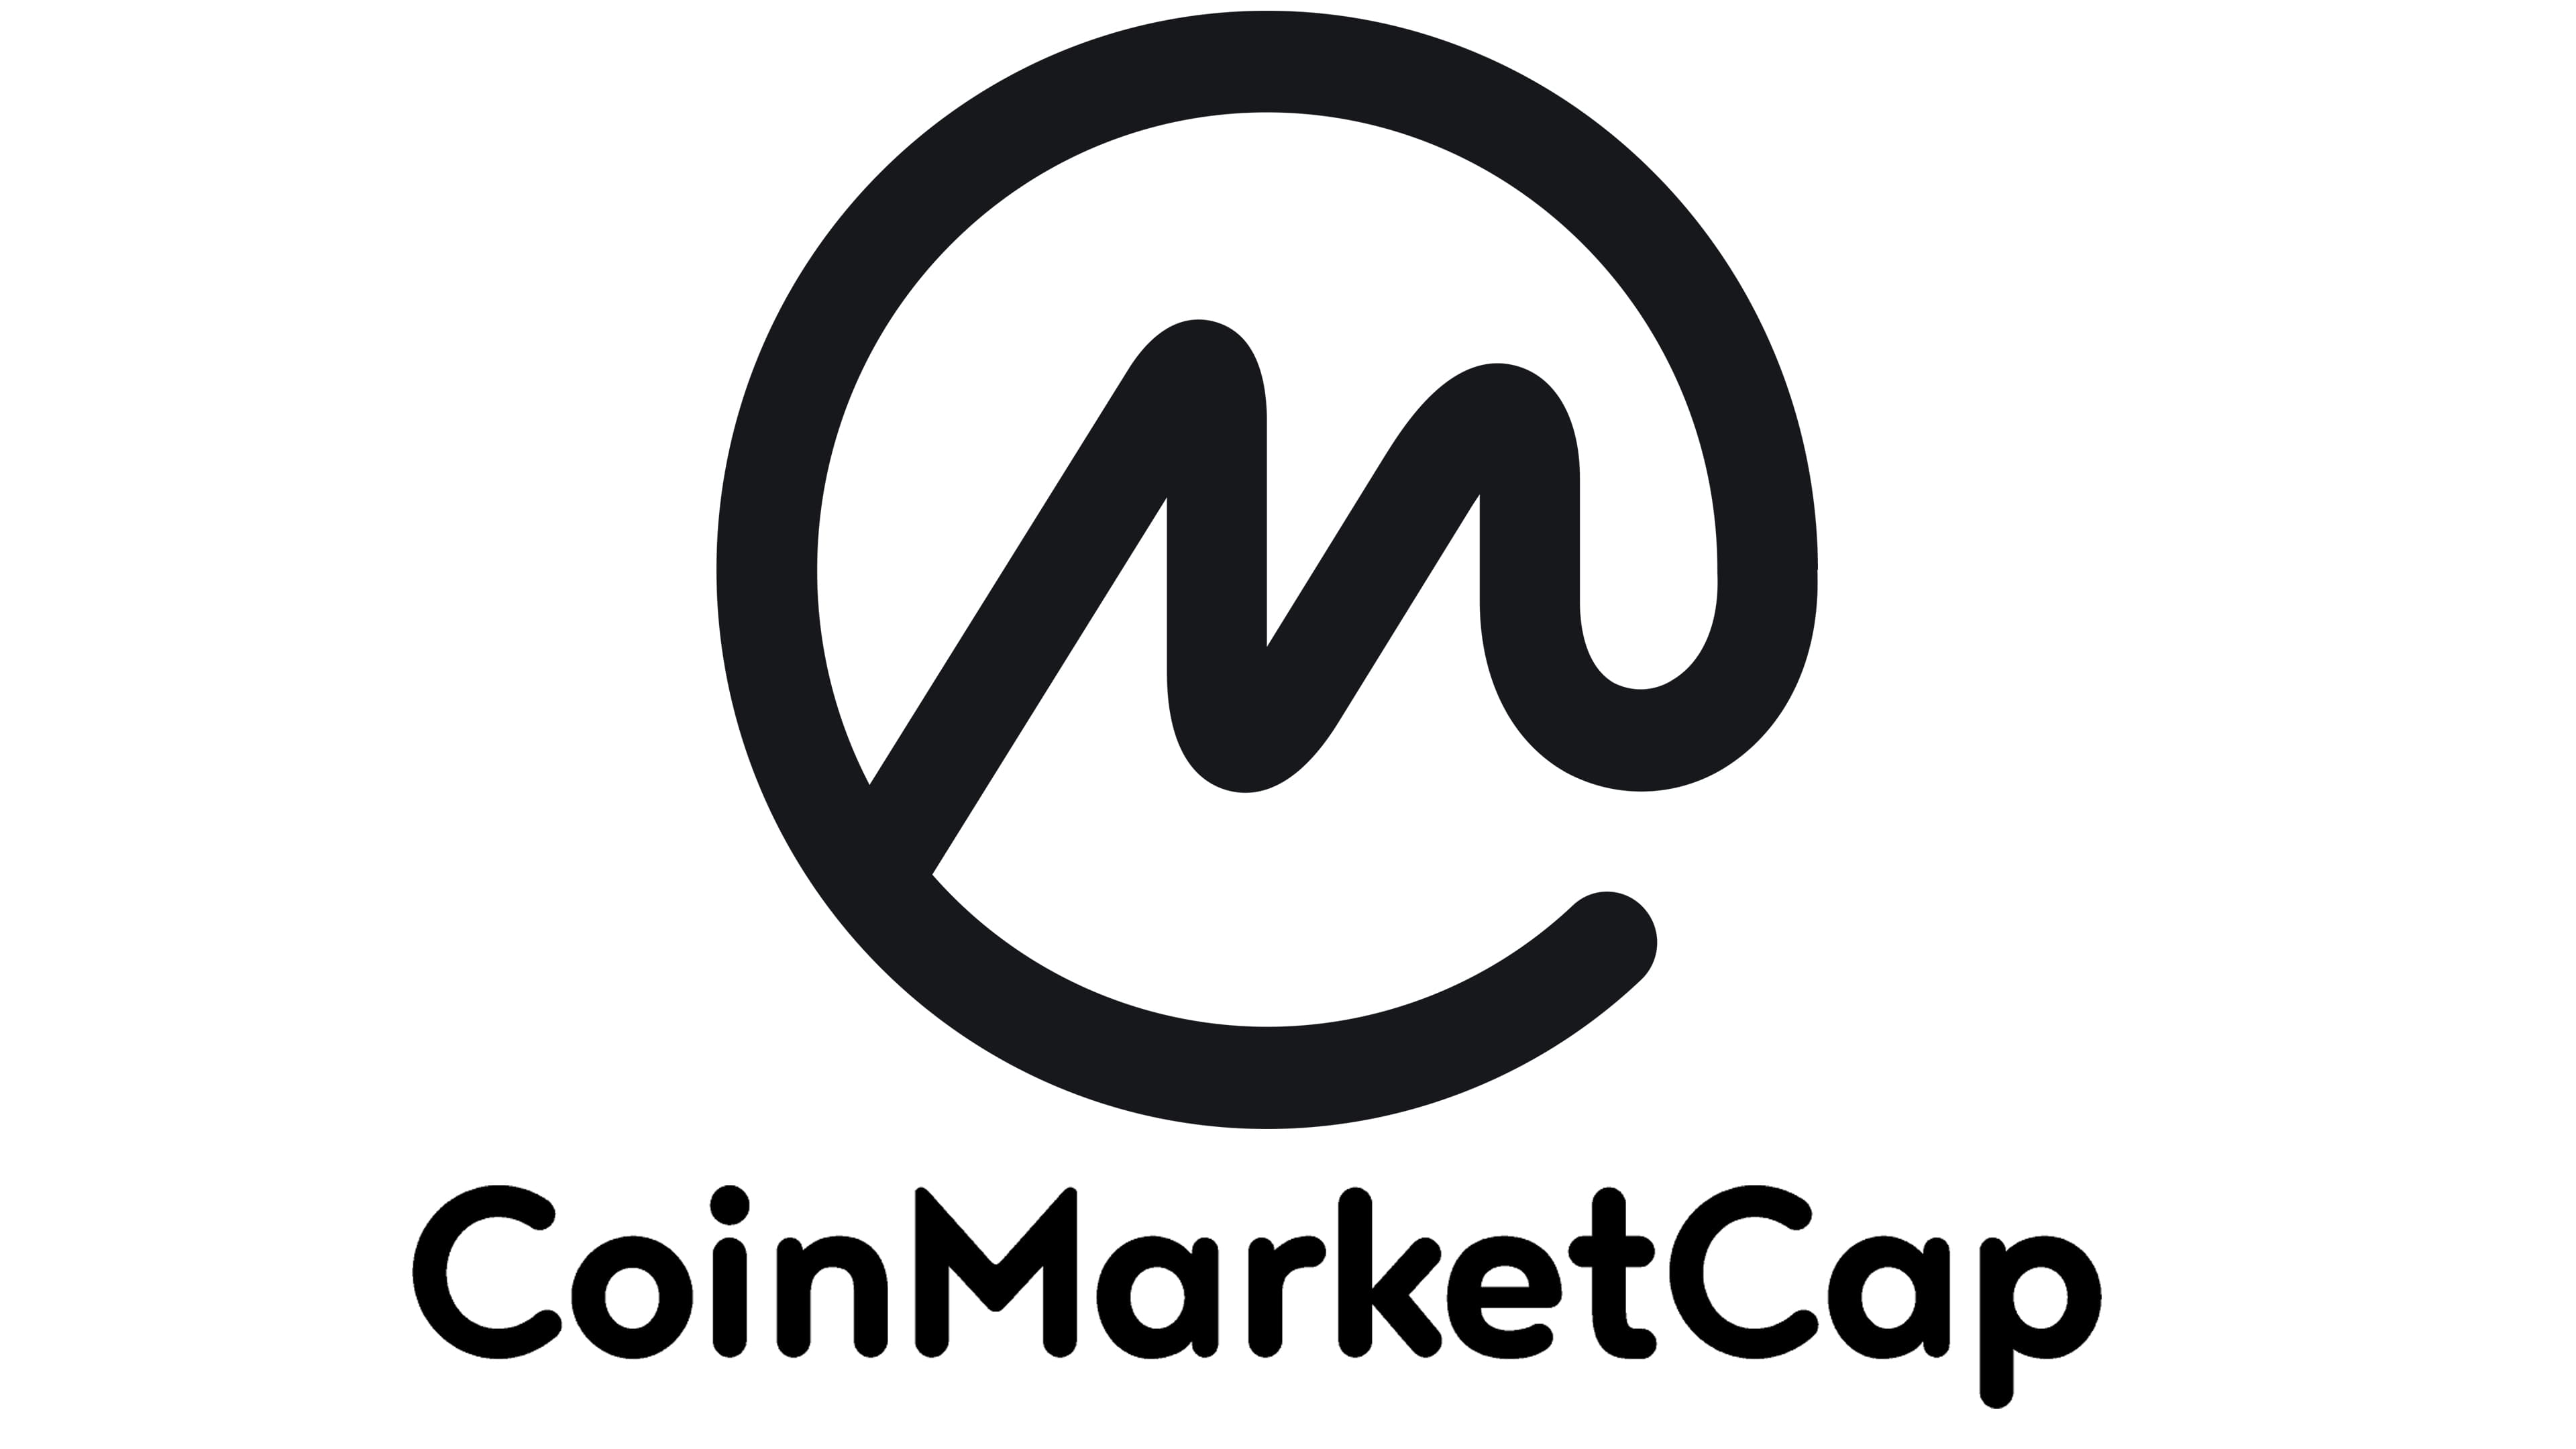 CoinMarketCap API Overview - Top Features, Endpoints and Alternatives